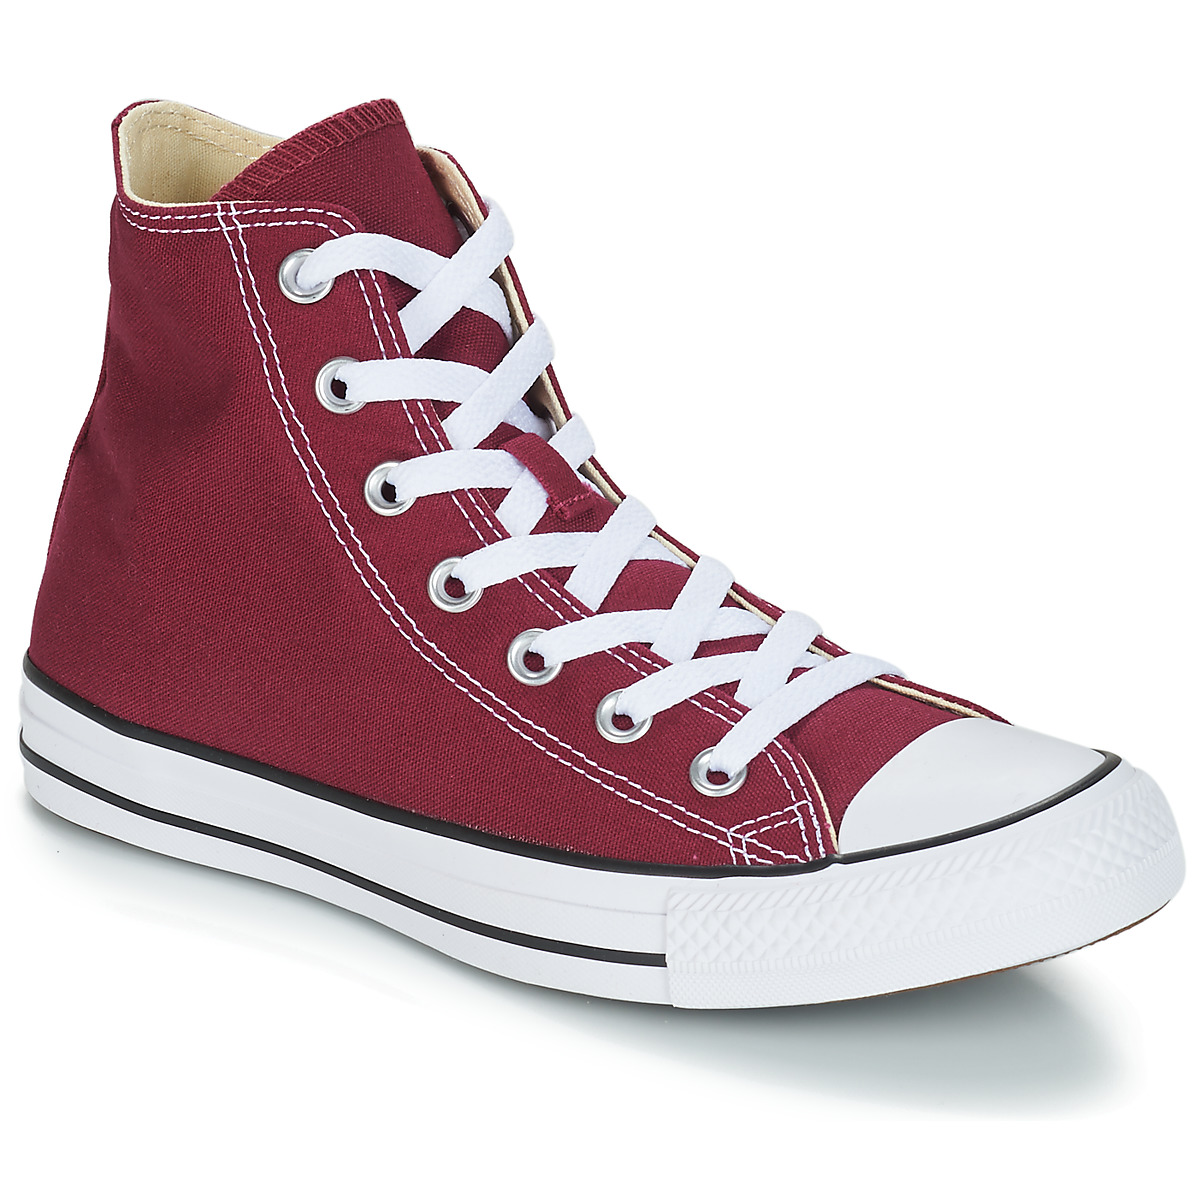 Converse Chuck Taylor All Star Hi Classic Colours - Sneakers - Red M9621C - Maat 41.5